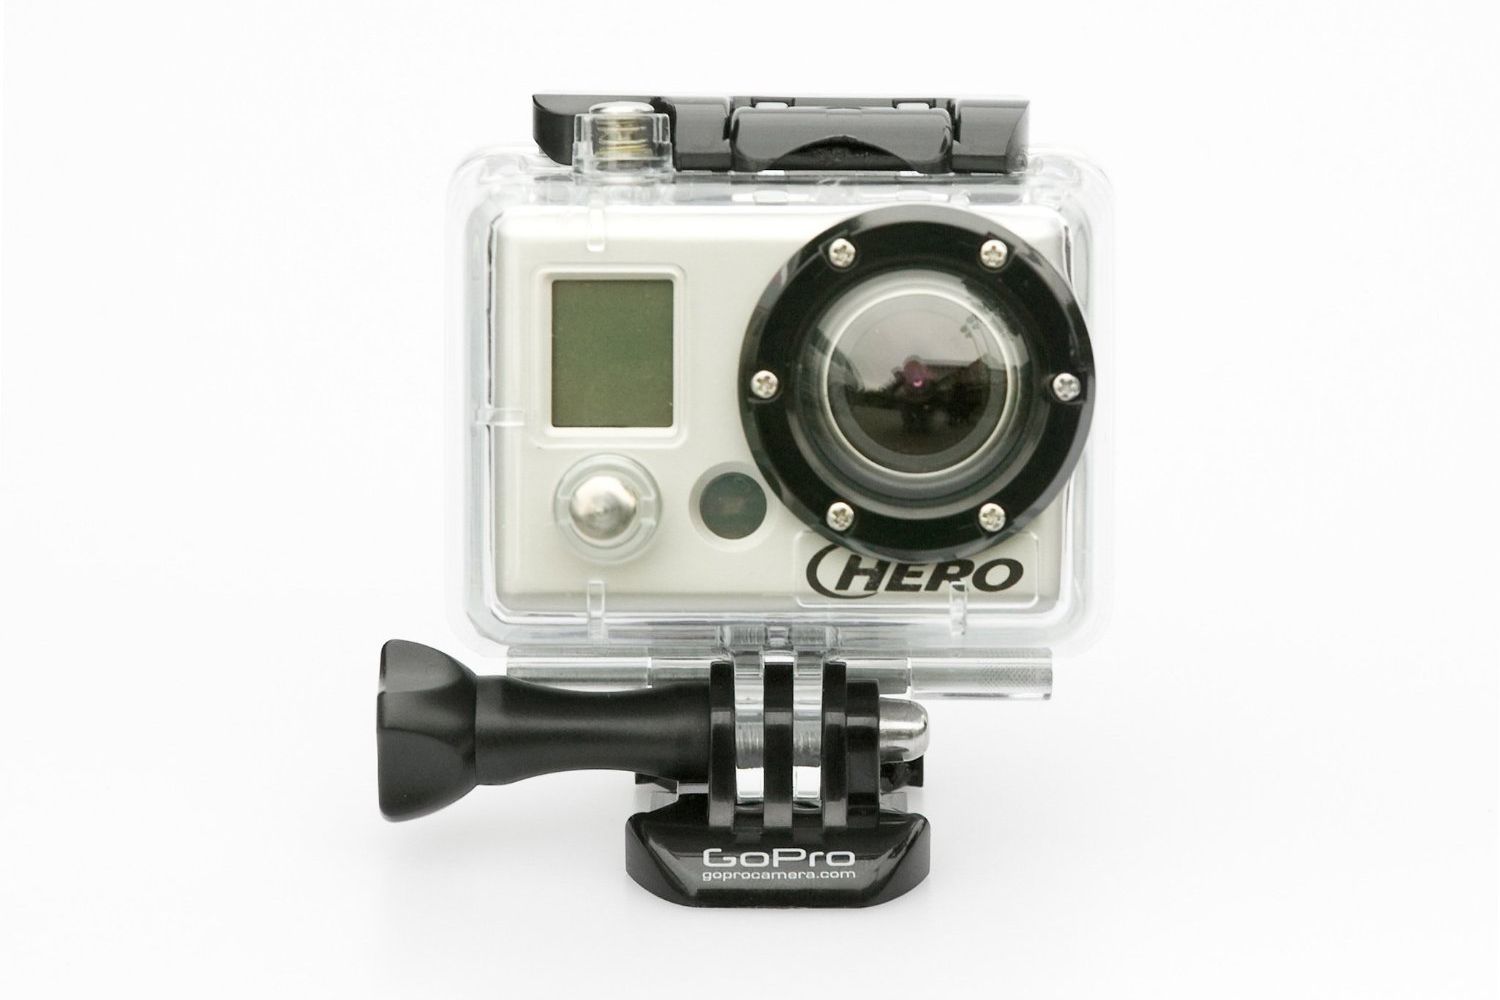 A GoPro mobile camera.